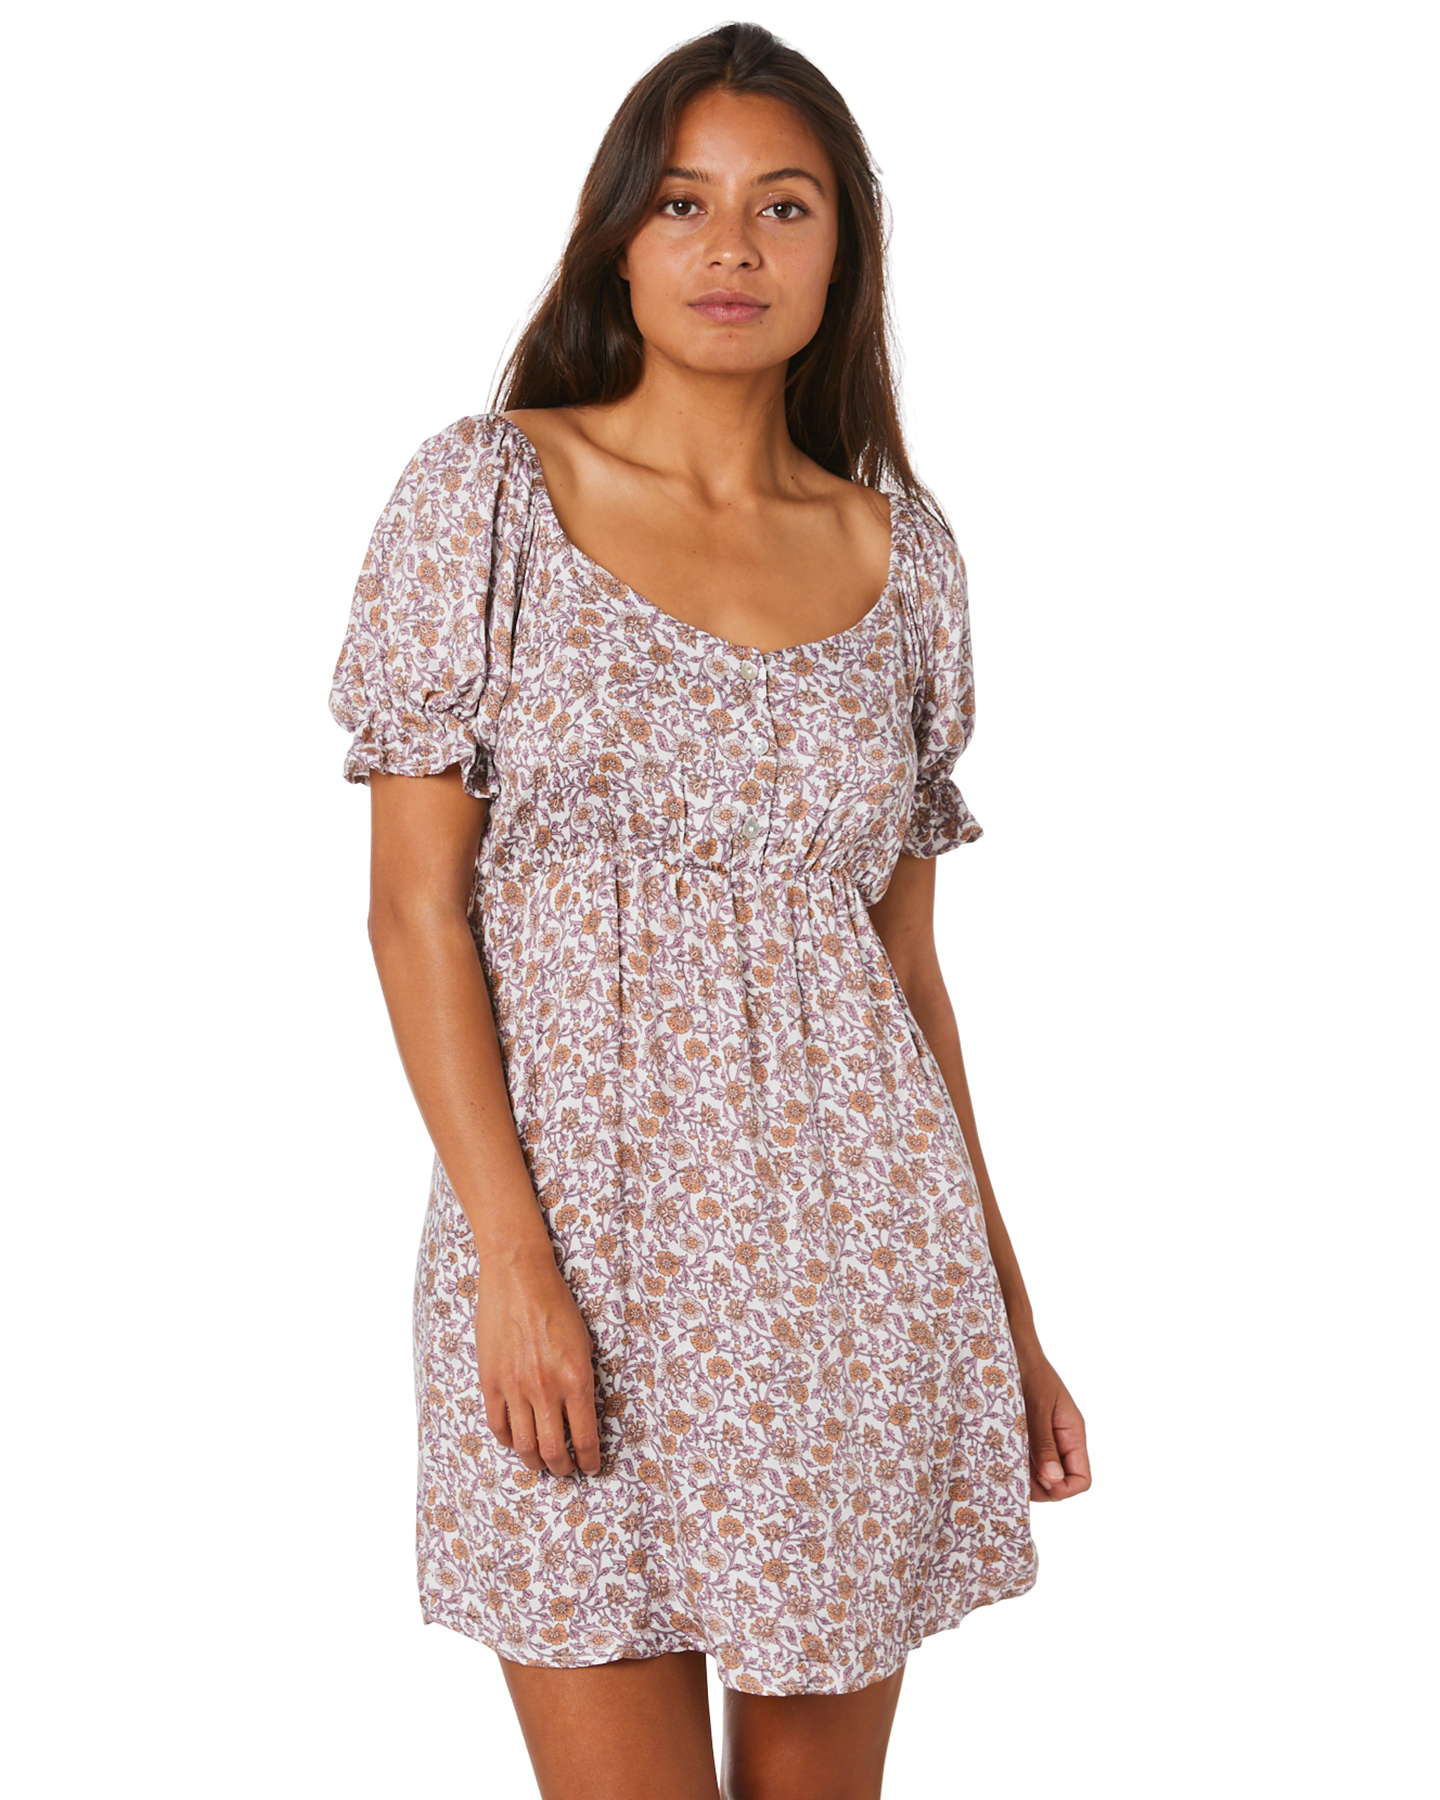 The Hidden Way Sunkissed Mini Dress - Sunkissed Floral | SurfStitch